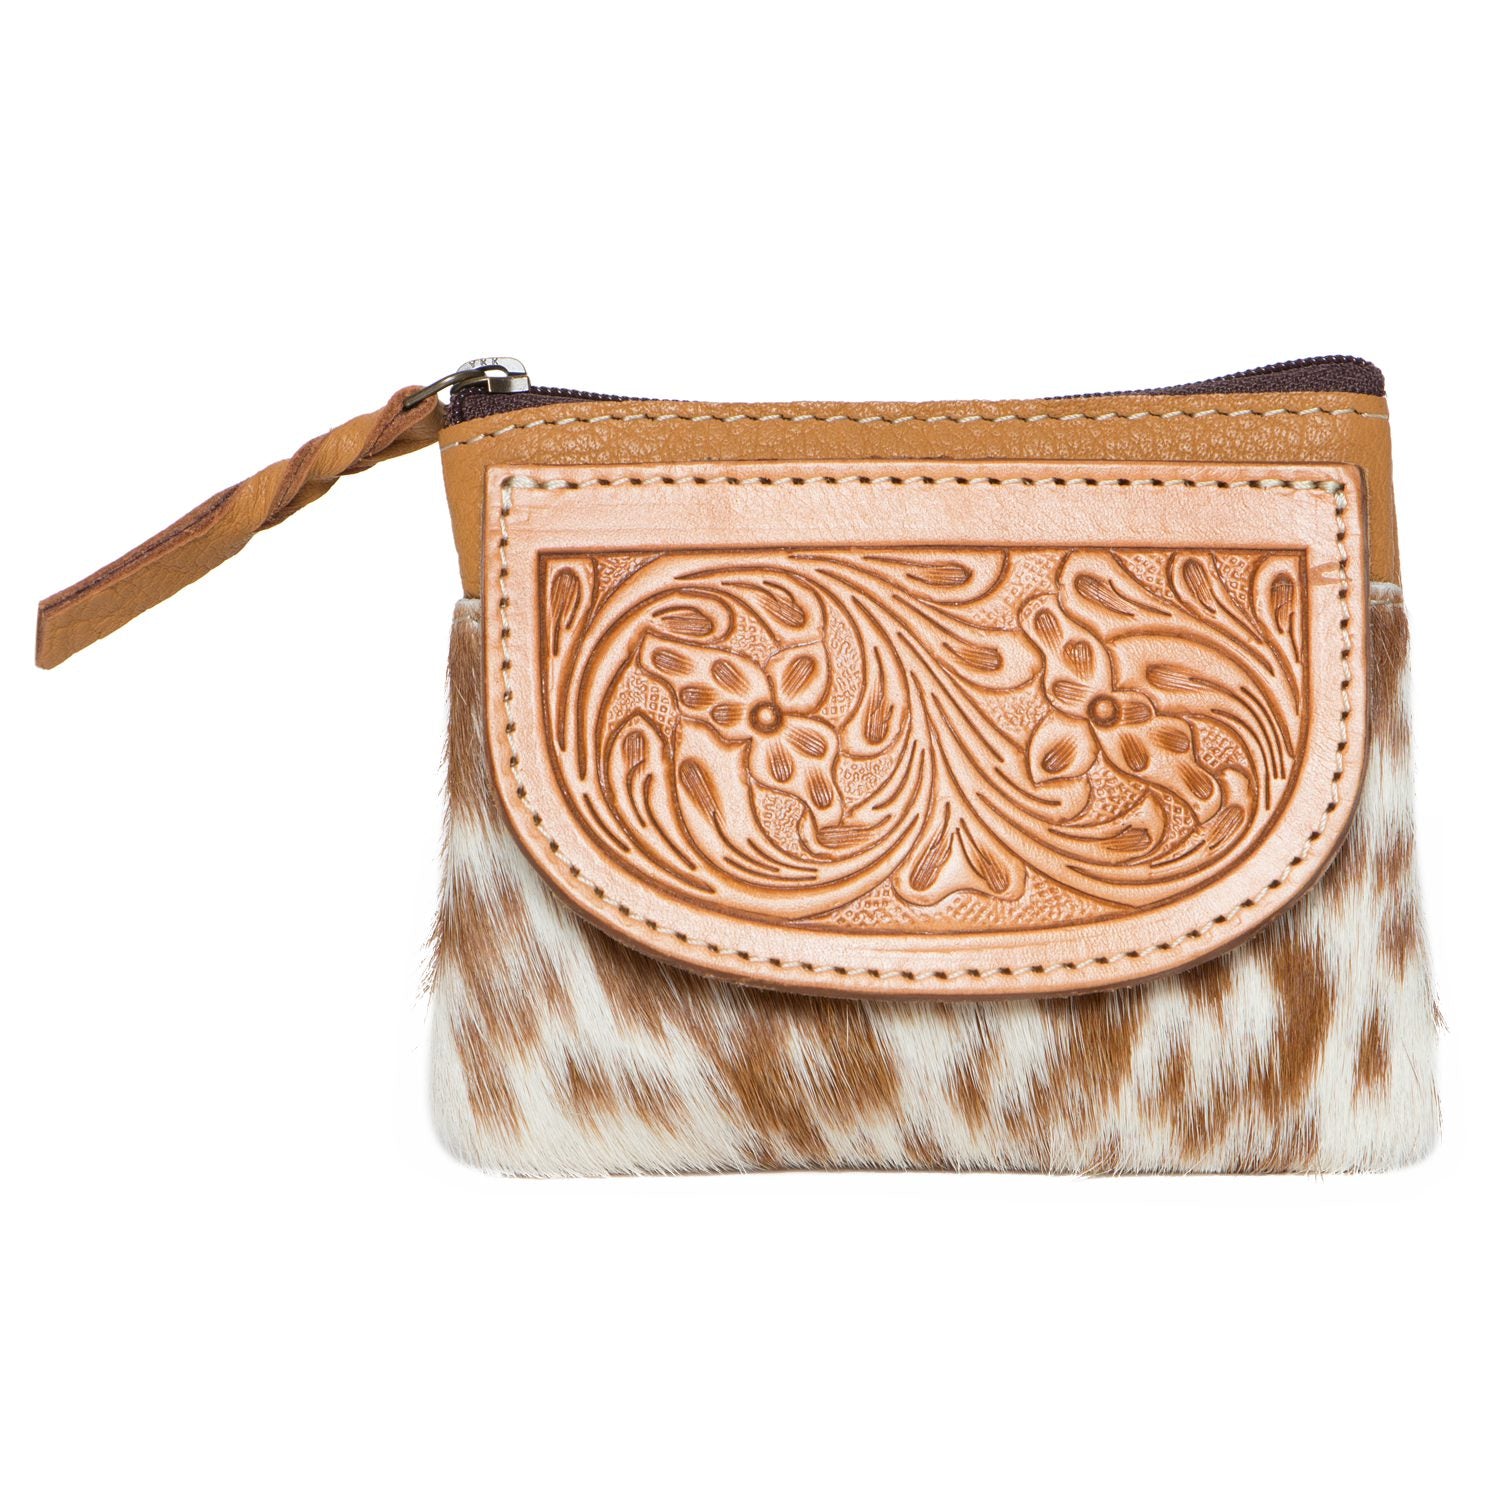 The Design Edge Tooling Leather Cowhide Zip Purse